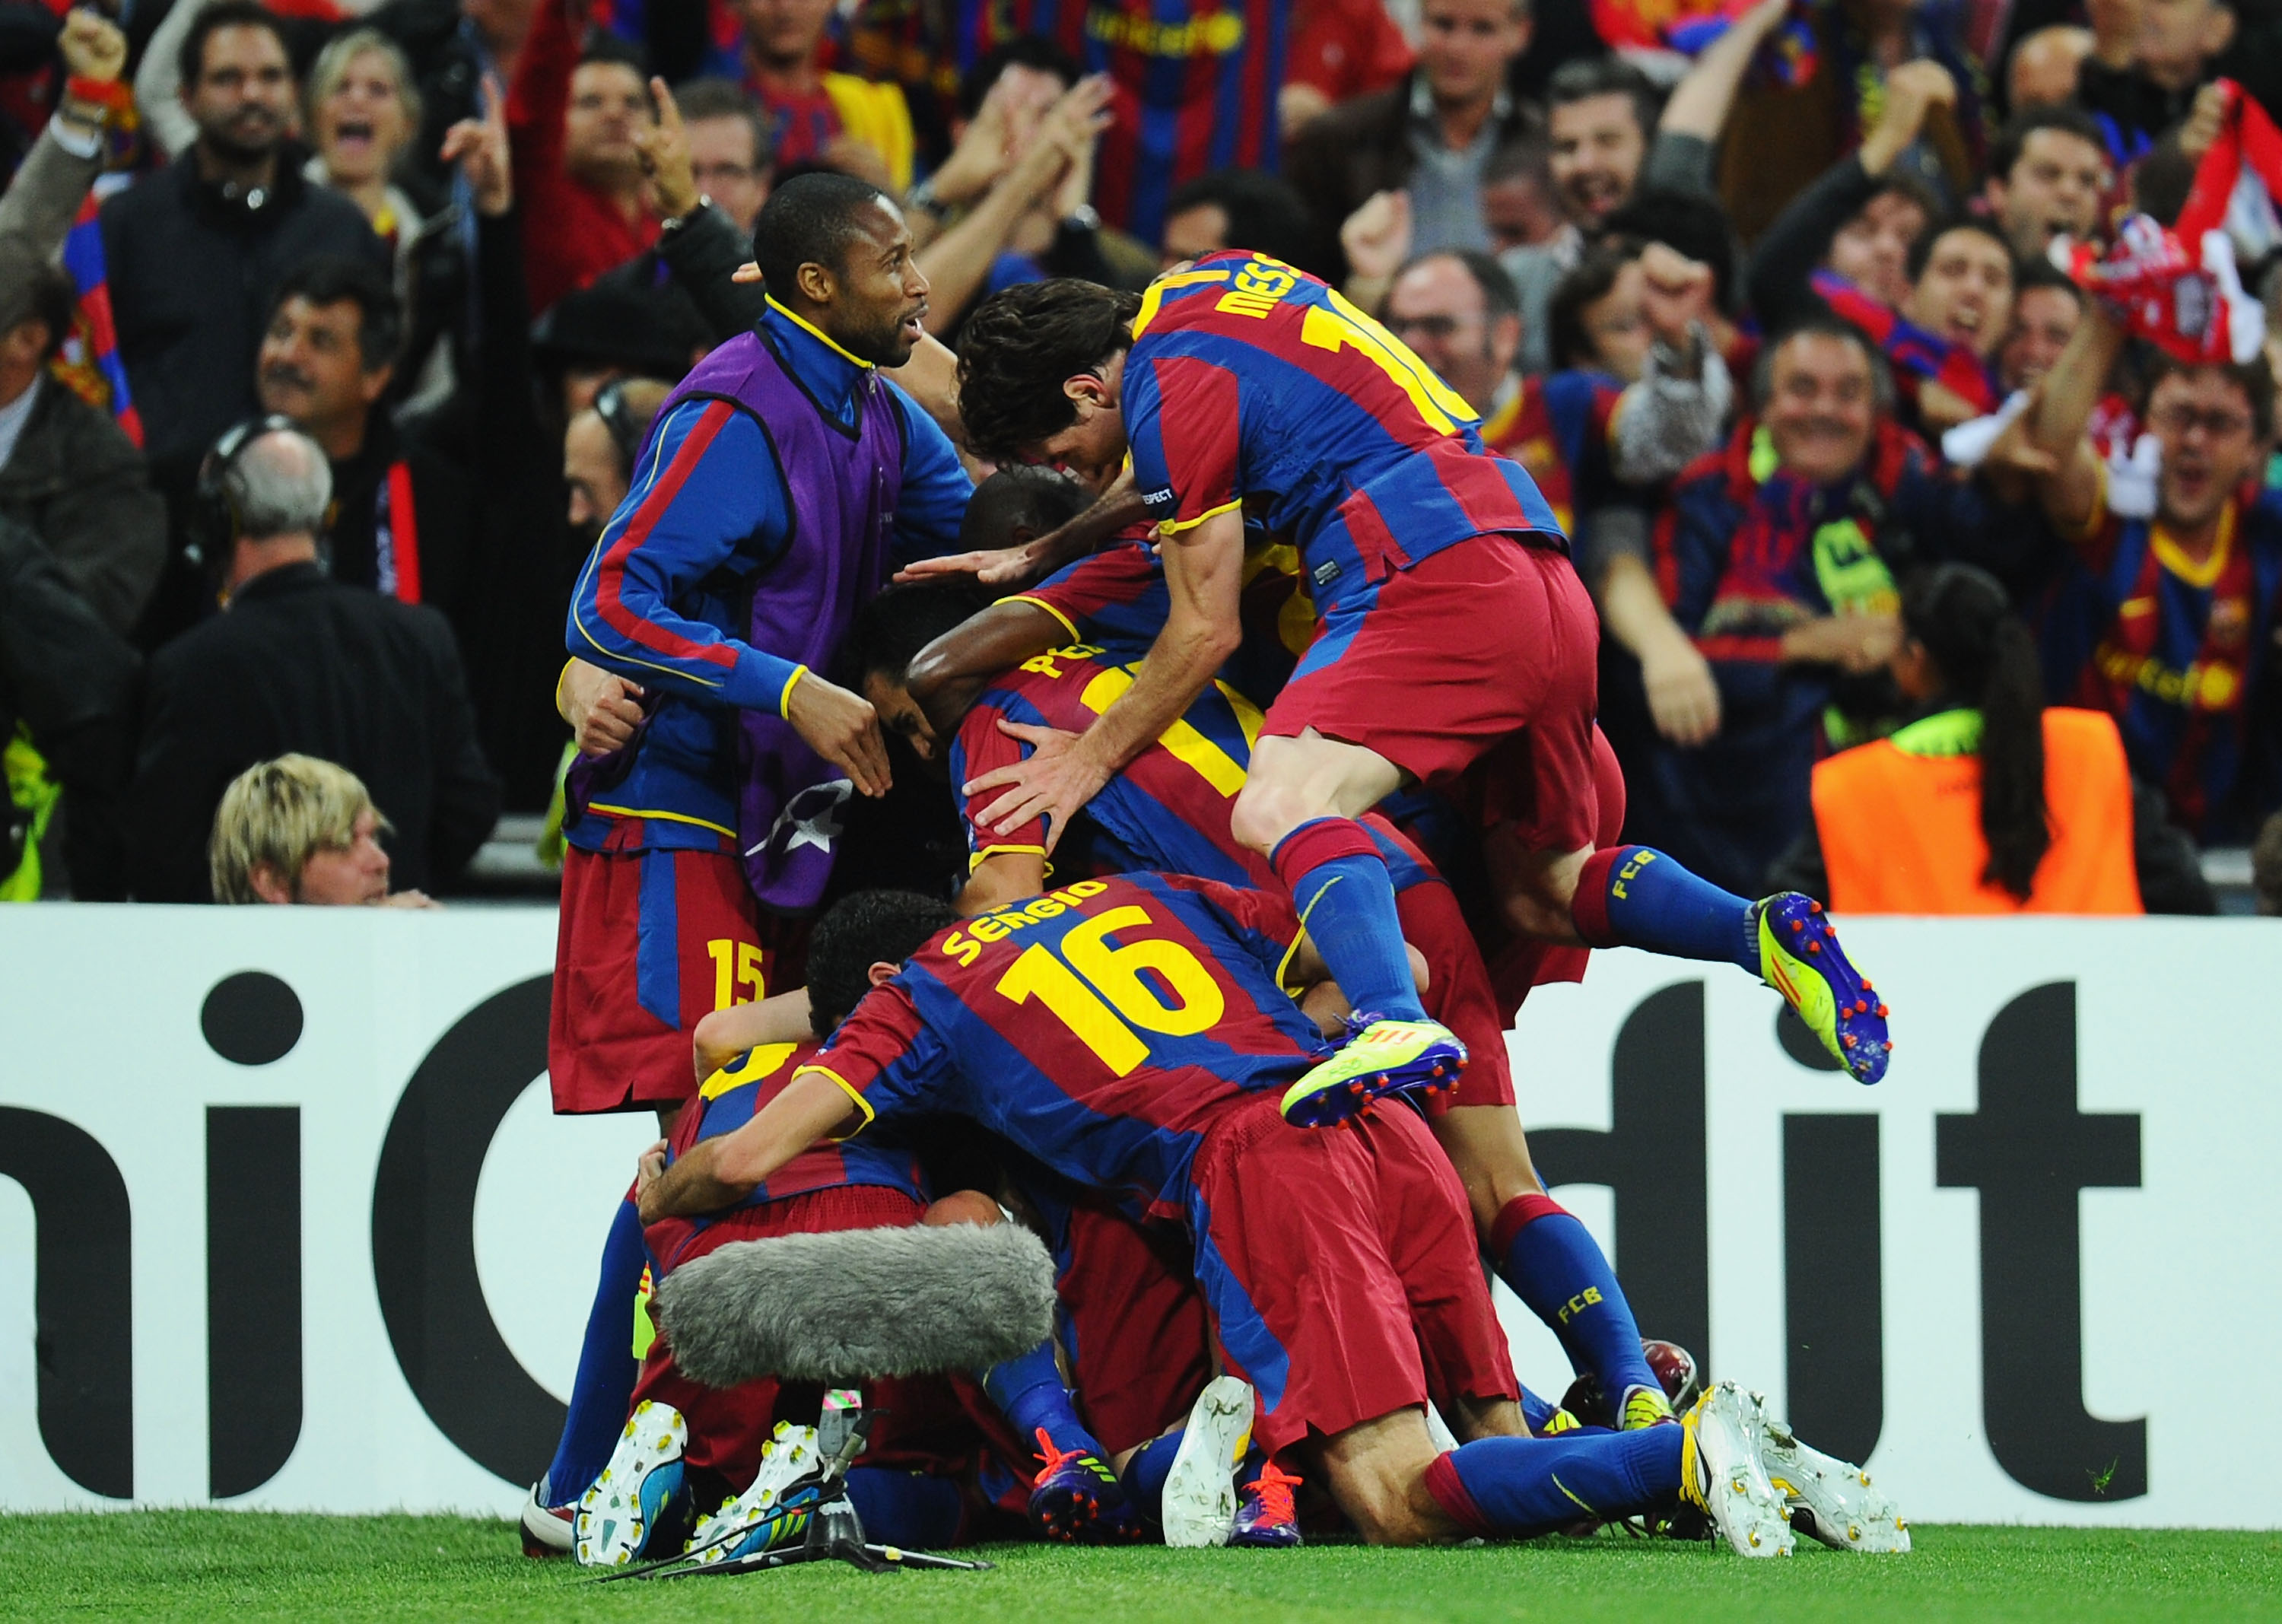 LONDON, ENGLAND - MAY 28:  David Villa of FC Barcelona is mobbed by teammates as they celebrate after he scores their third goal during the UEFA Champions League final between FC Barcelona and Manchester United FC at Wembley Stadium on May 28, 2011 in Lon